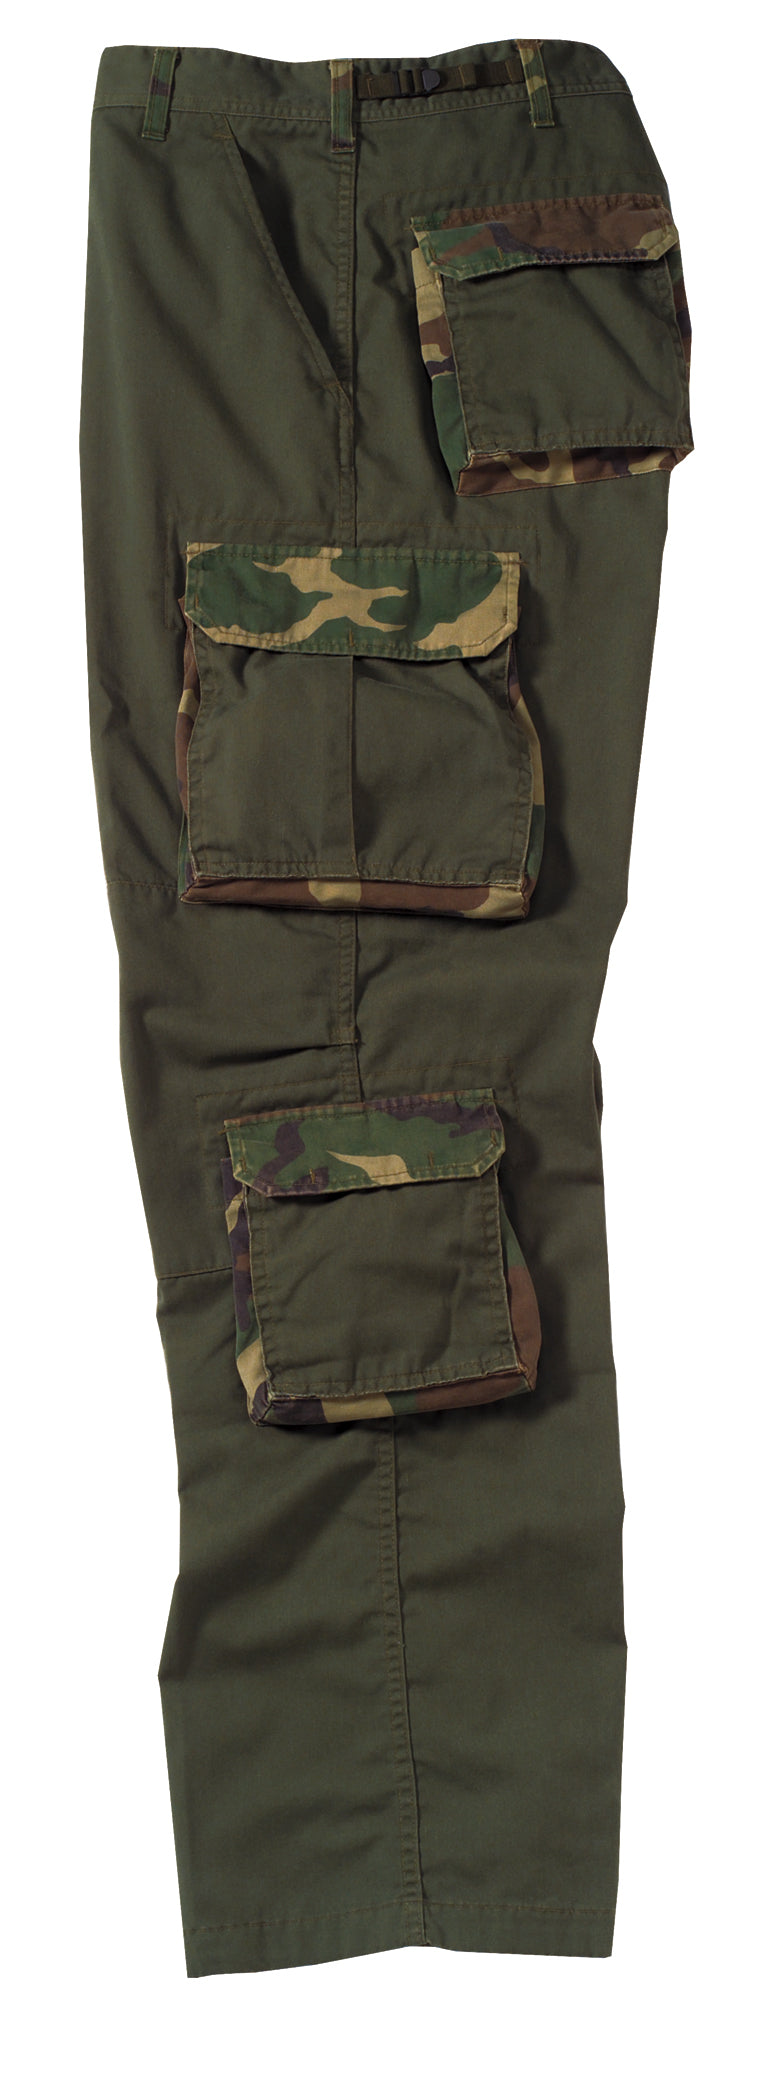 Rothco Vintage Accent Paratrooper Fatigues